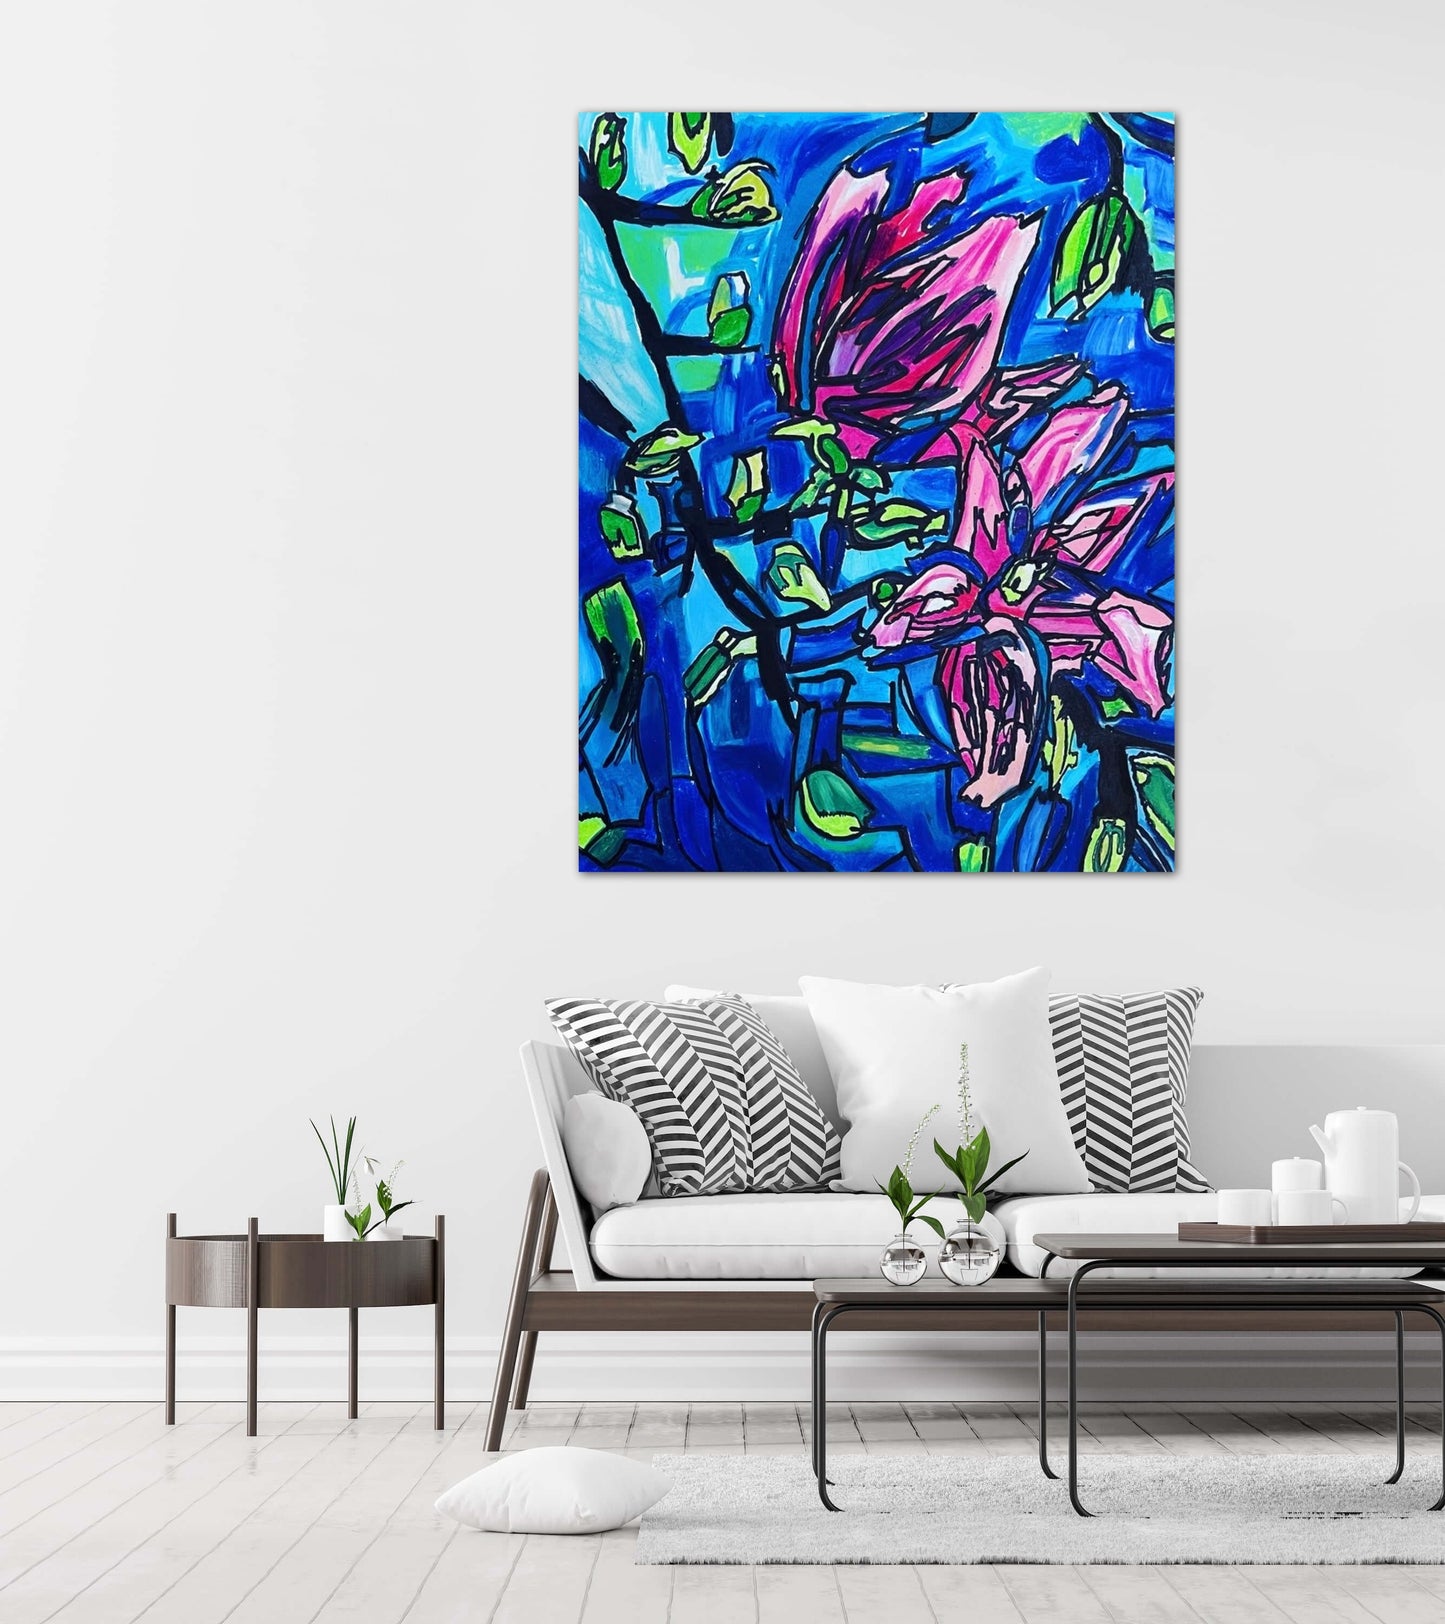 Magnolia - Stretched Canvas Print in more sizes